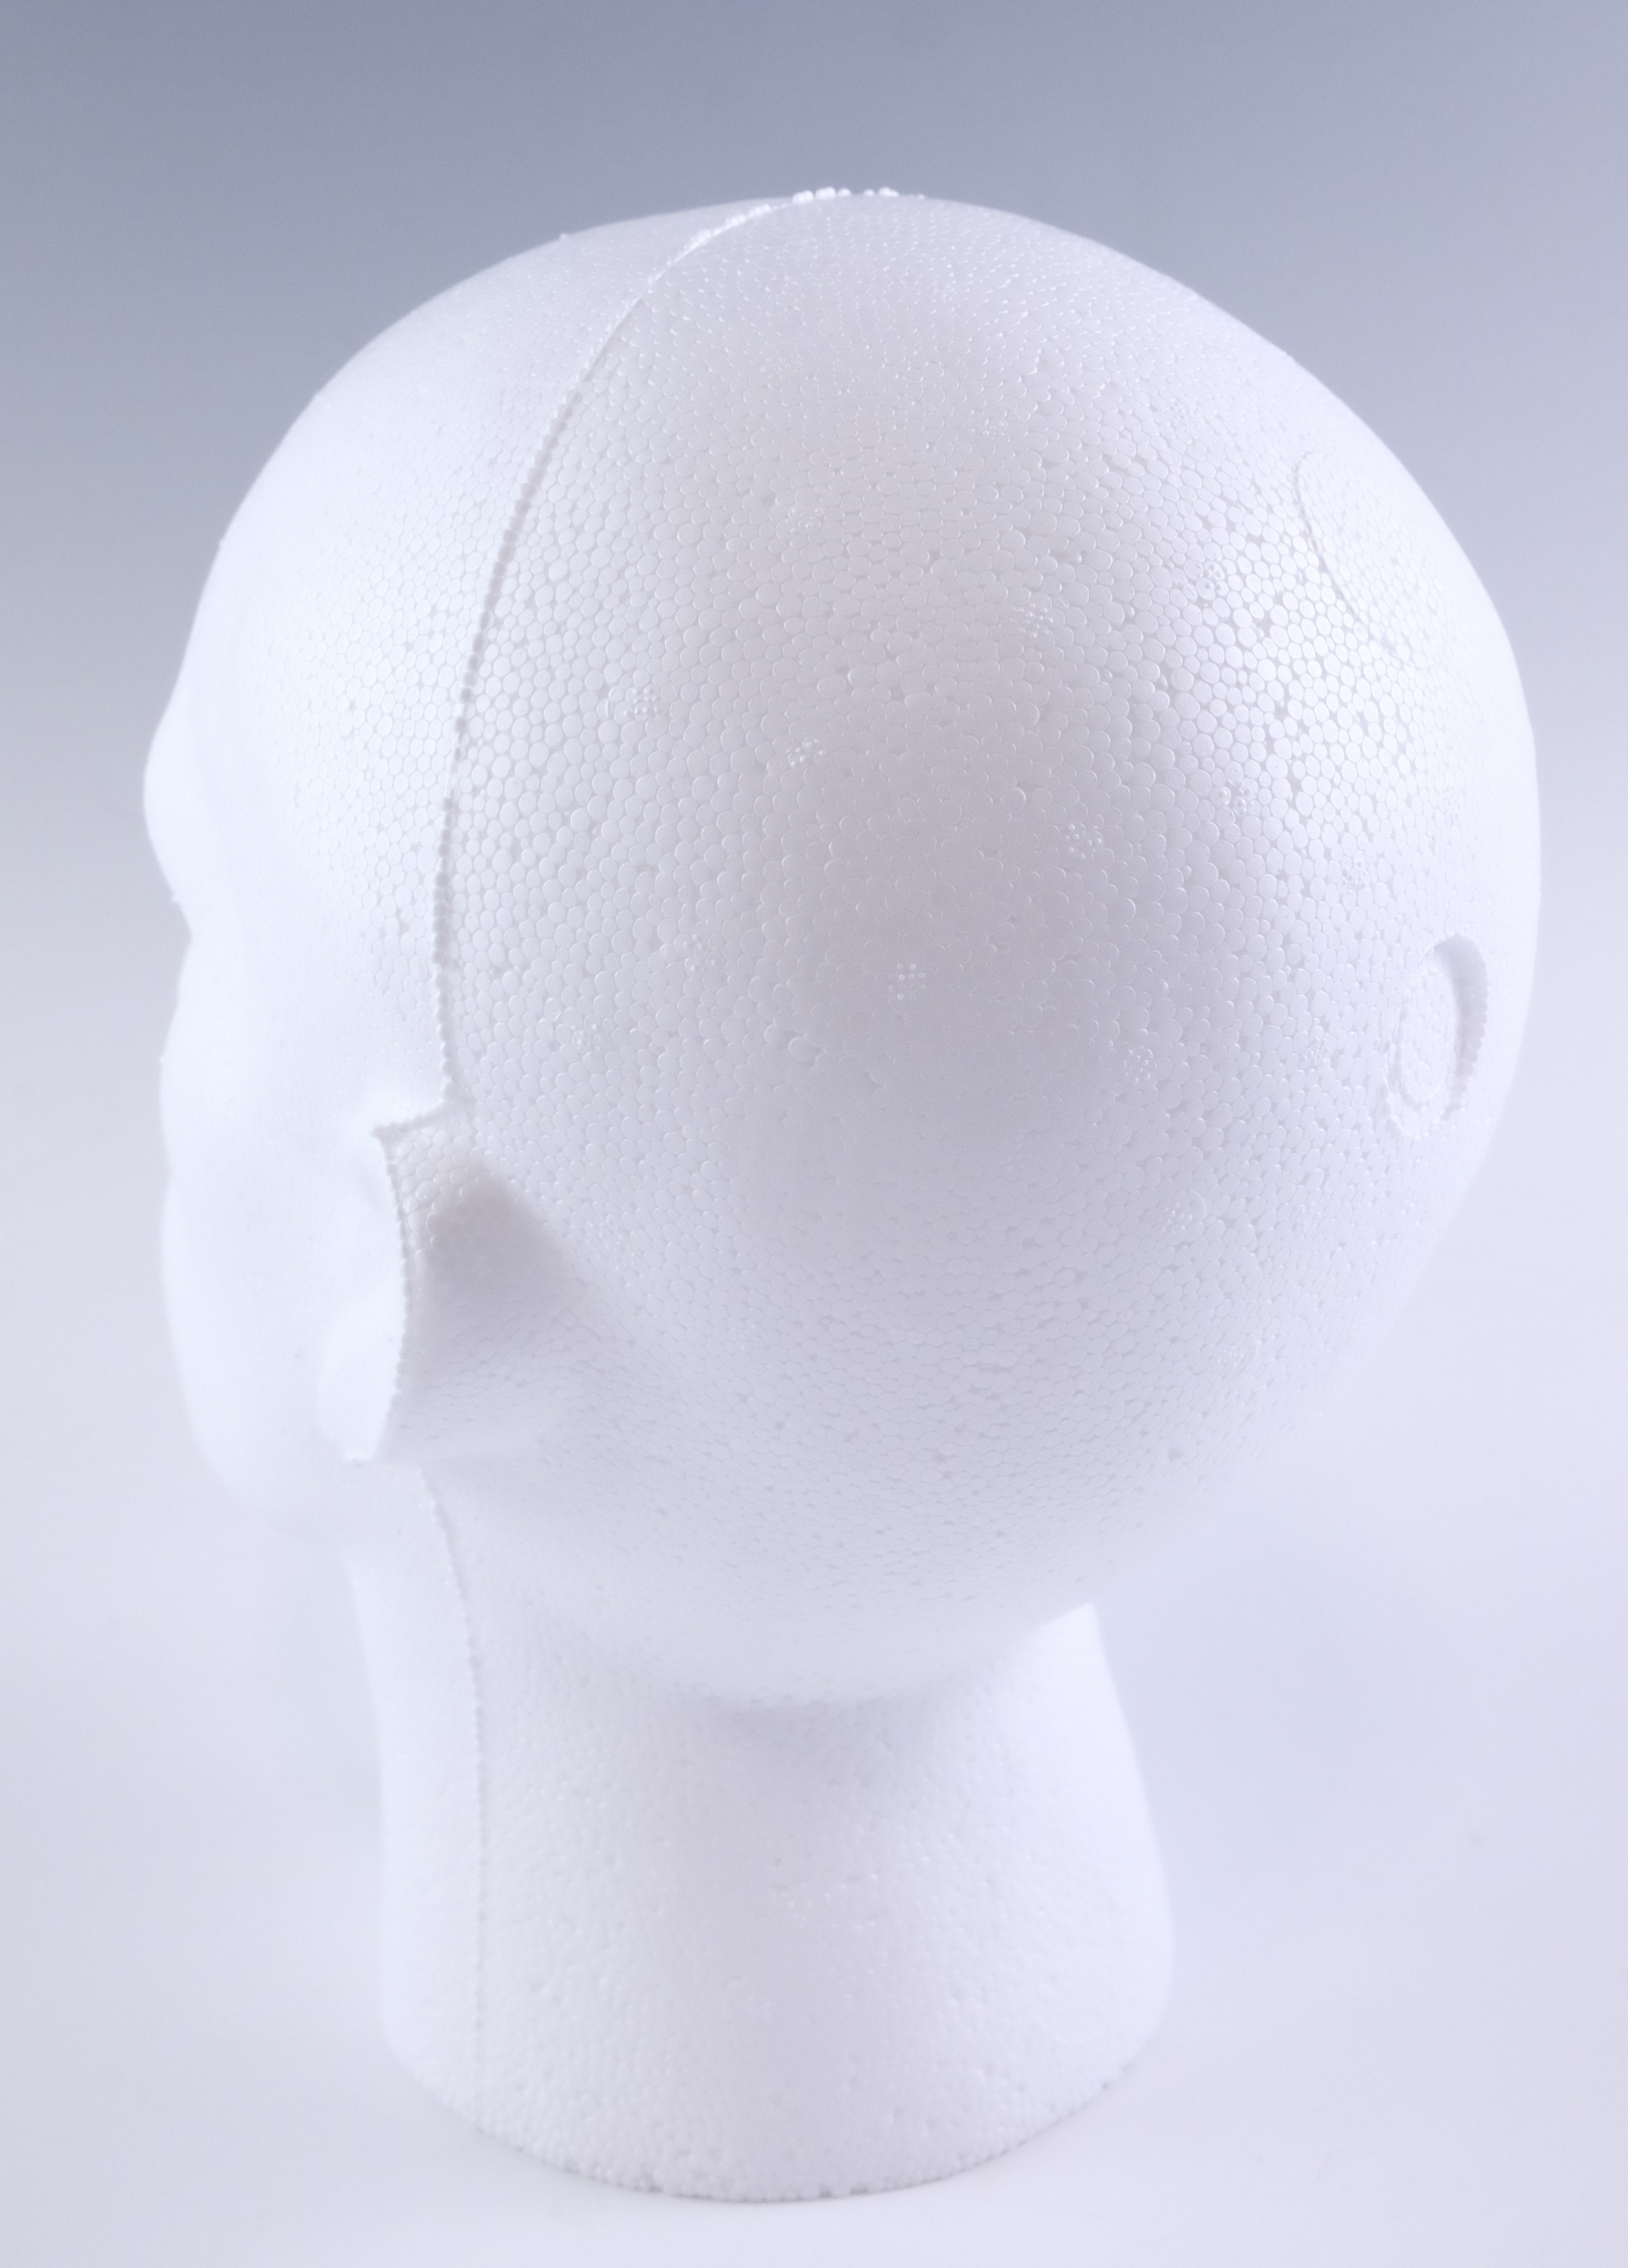 Three new-old-stock polystyrene display mannequin heads, boxed - Image 3 of 3